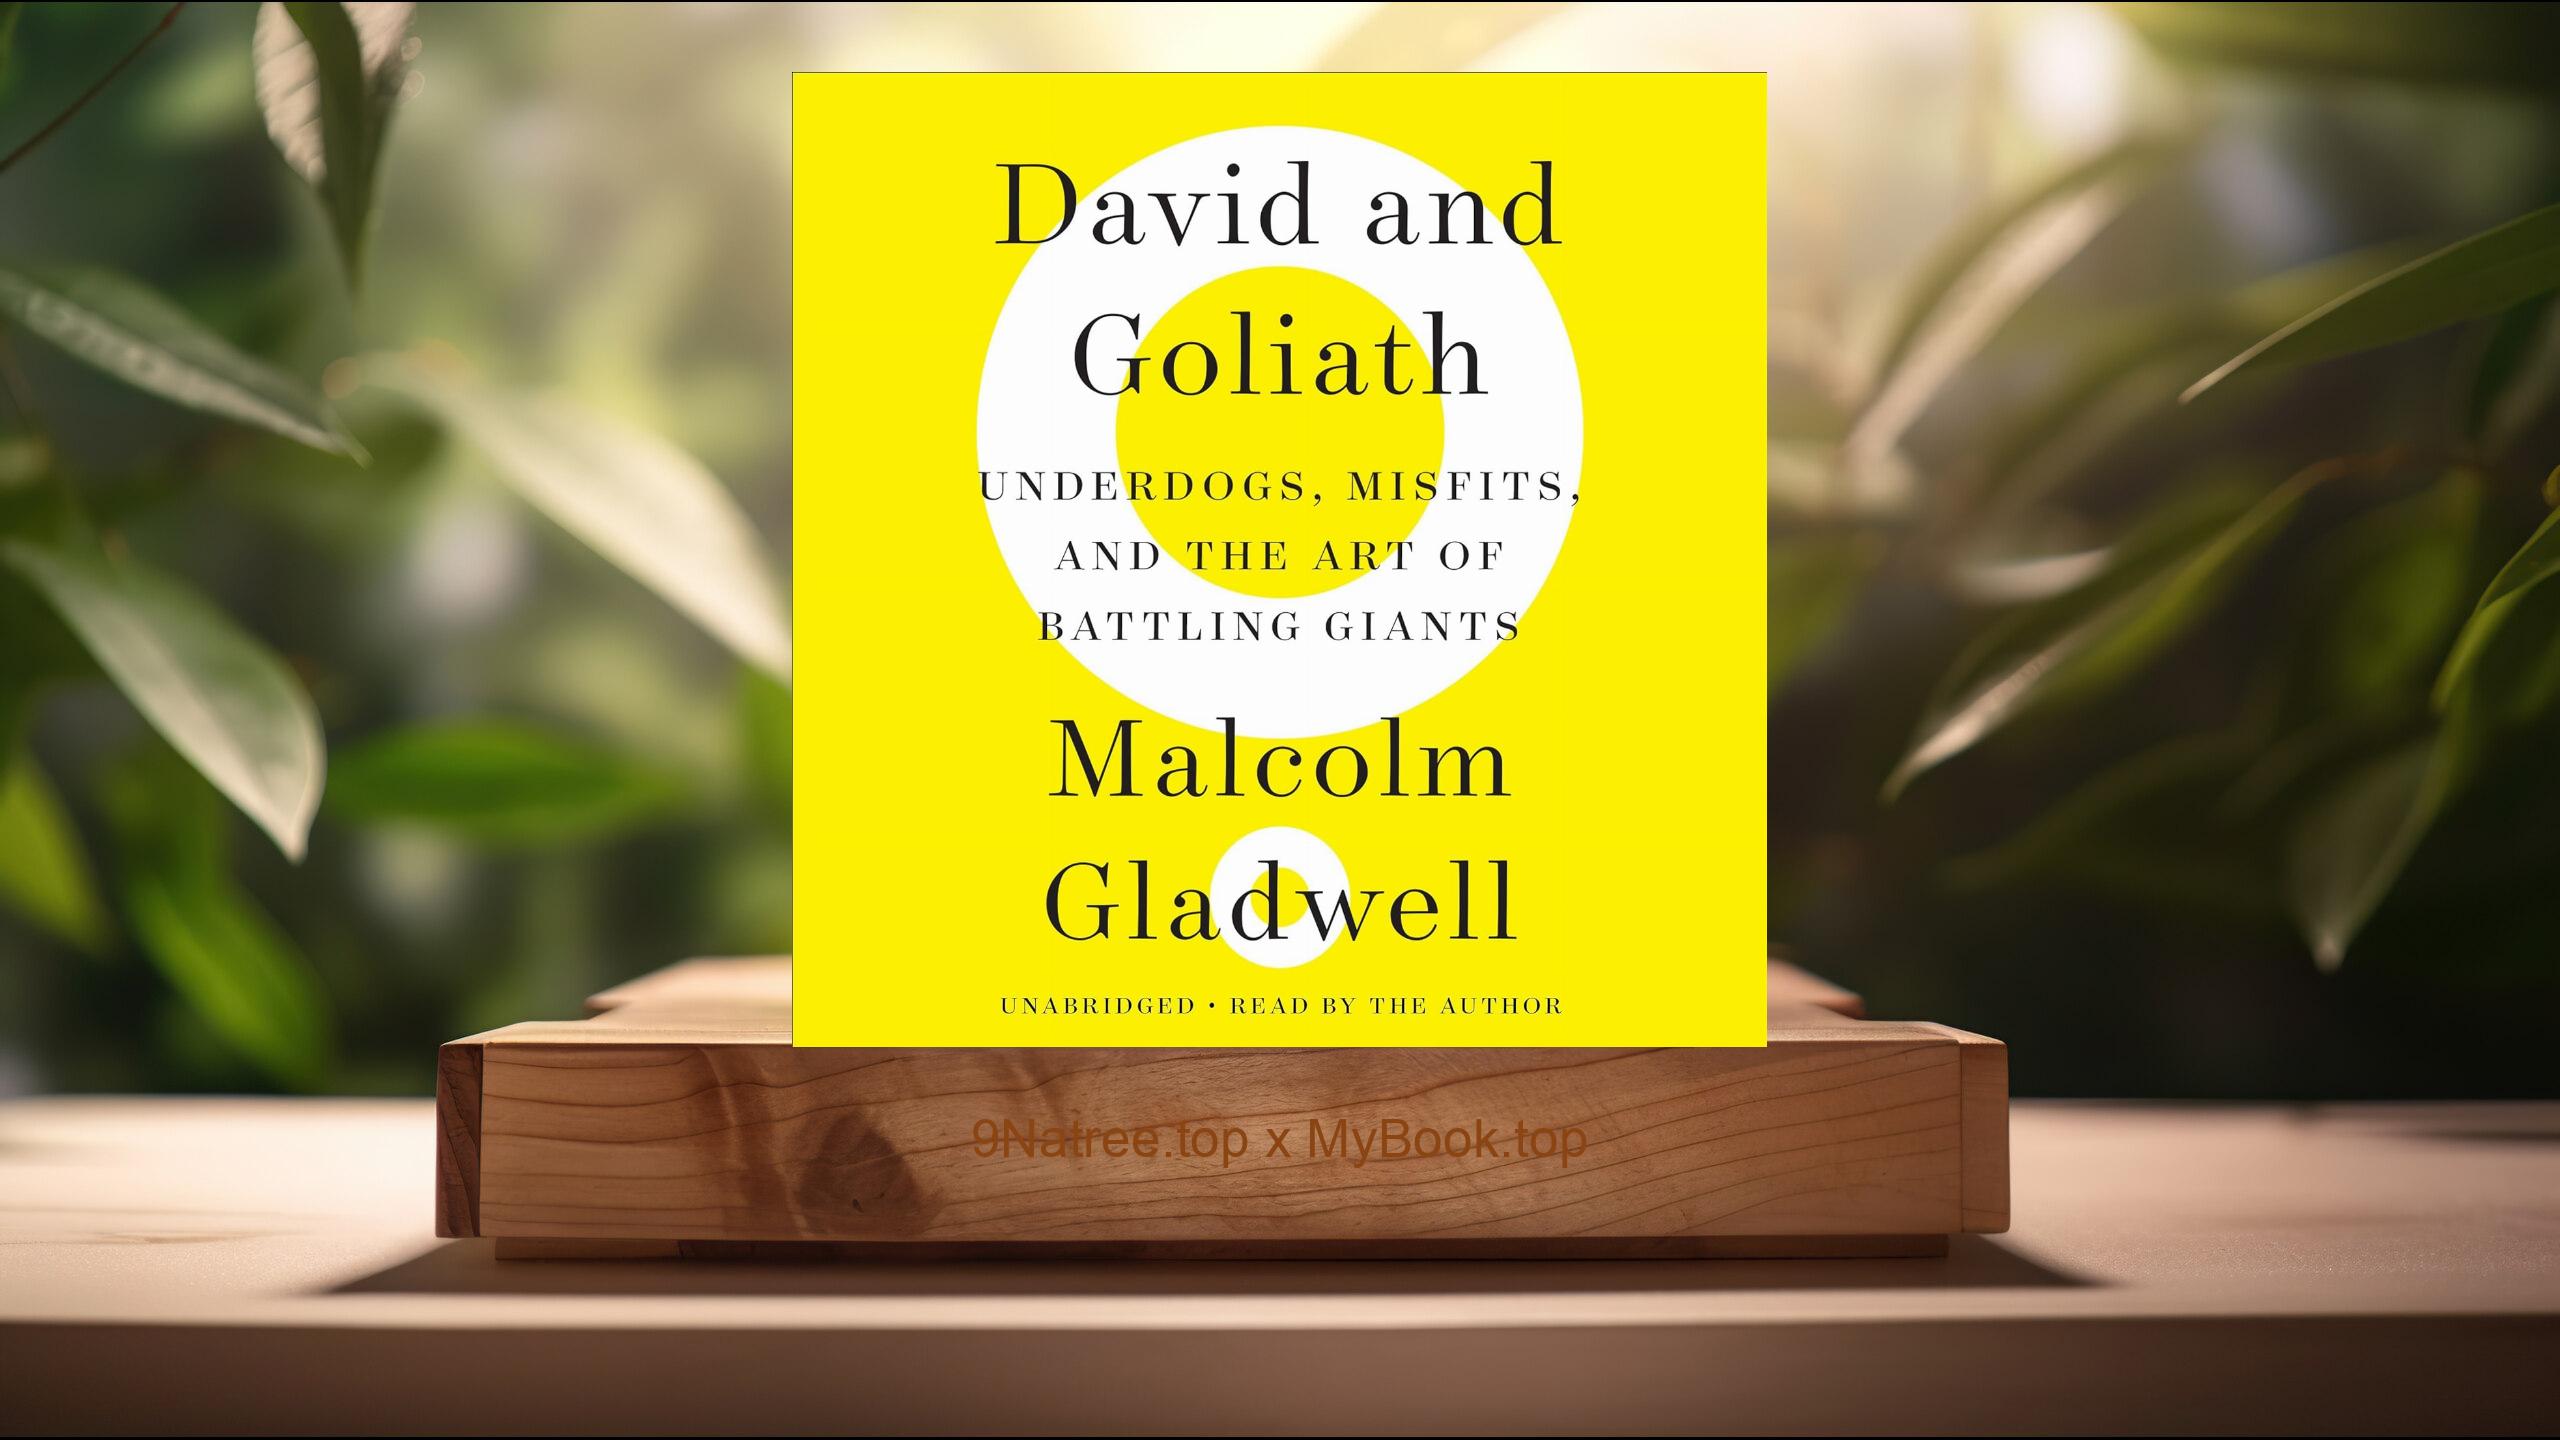 [Review] David and Goliath: Underdogs, Misfits, and the Art of Battling Giants (Malcolm Gladwell) Summarized